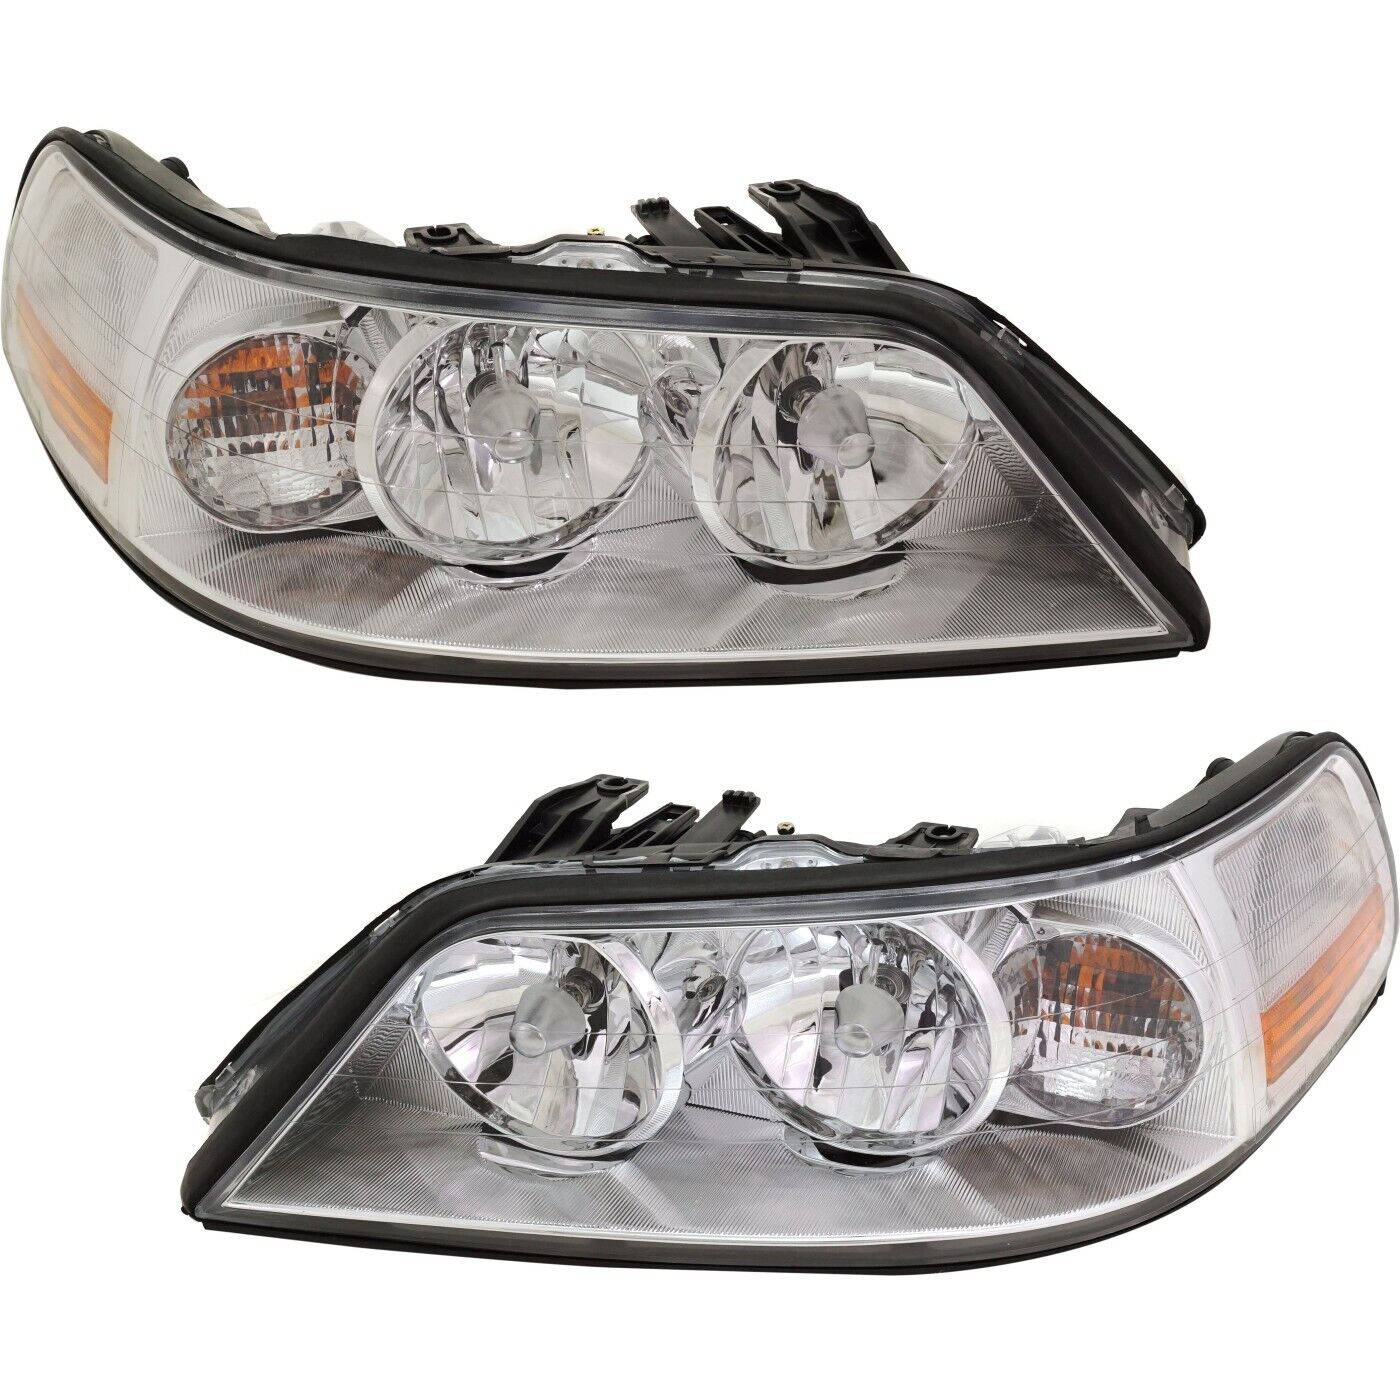 Headlight Assembly Set For 2005-11 Lincoln Town Car Left Right Halogen With Bulb